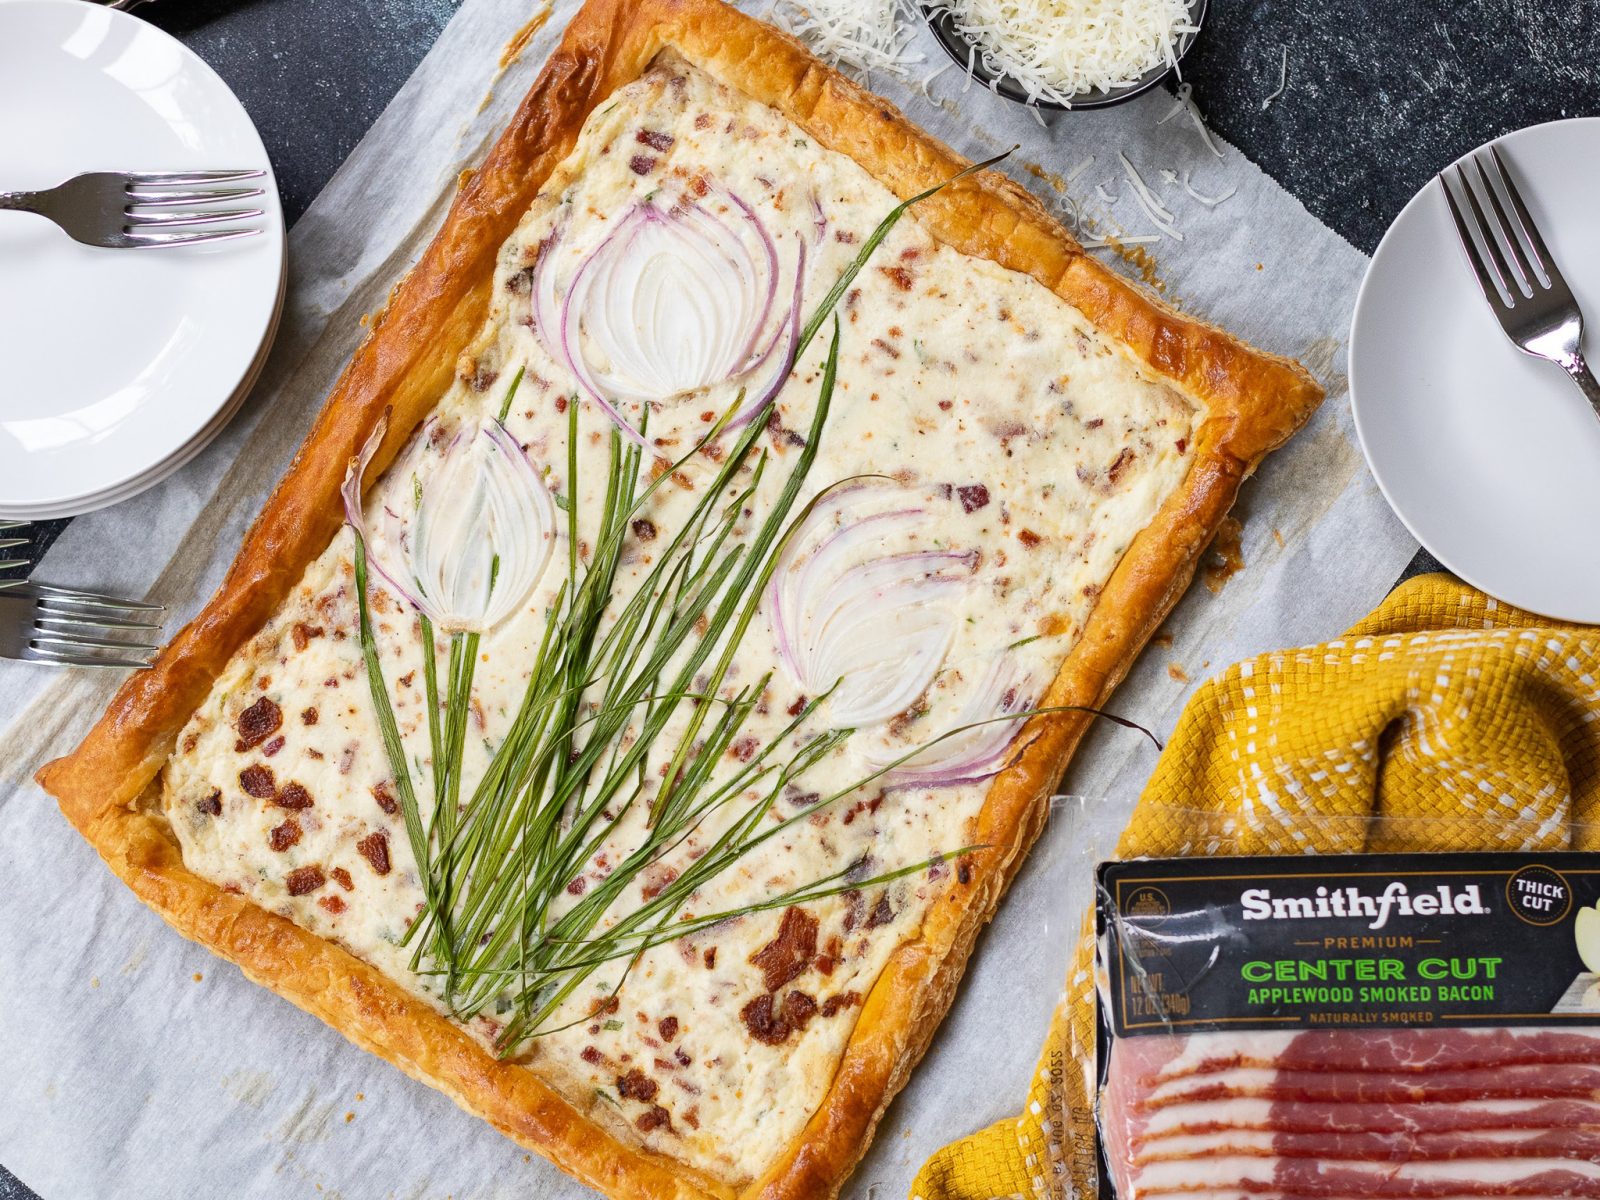 New Smithfield Bacon Flavors To Enjoy – Perfect For My Bacon and Chive Cheese Tart